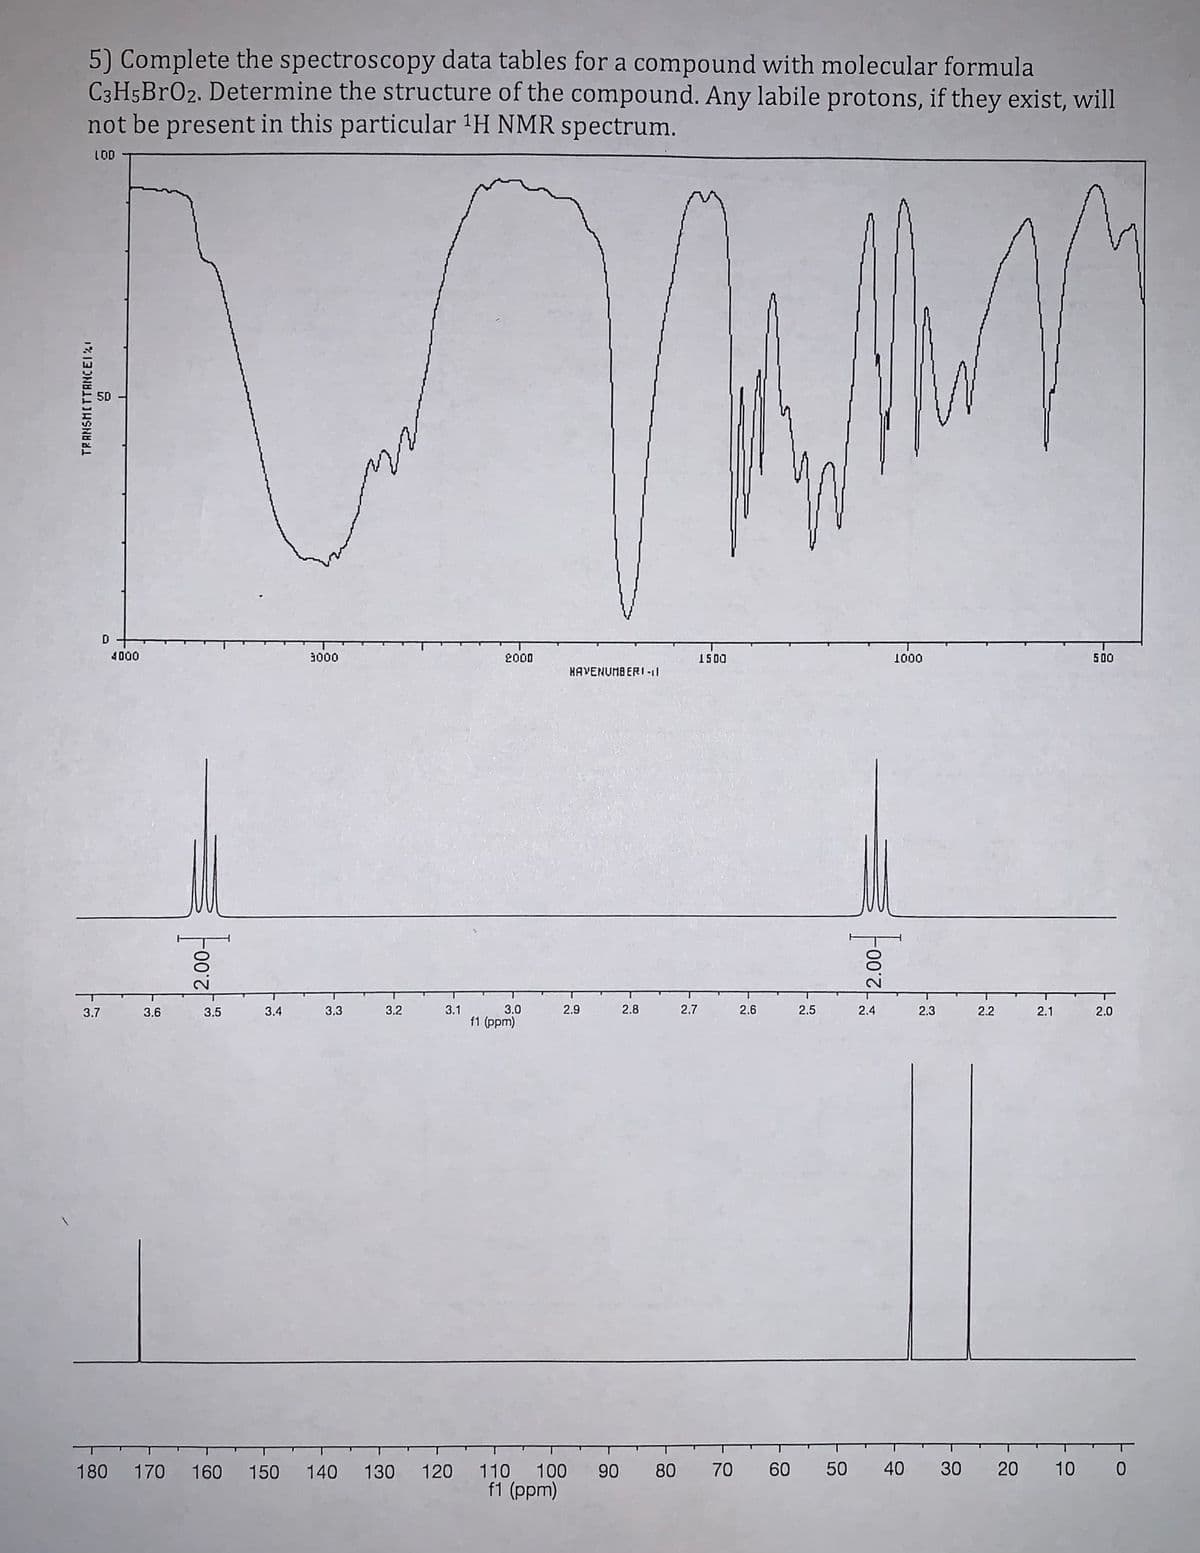 5) Complete the spectroscopy data tables for a compound with molecular formula
C3H5BR02. Determine the structure of the compound. Any labile protons, if they exist, will
not be present in this particular 'H NMR spectrum.
4000
3000
2000
15 0O
1000
500
HAVENUMBERI-|
2.7
3.1
f1 (ppm)
3.7
3.6
3.5
3.4
3.3
3.2
3.0
2.9
2.8
2.6
2.5
2.4
2.3
2.2
2.1
2.0
130 120 110 100 90
f1 (ppm)
180 170 160 150 140
80
70
60
40
10
20
30
12.00-
50
00-
TPANSHITTANCEI%I
